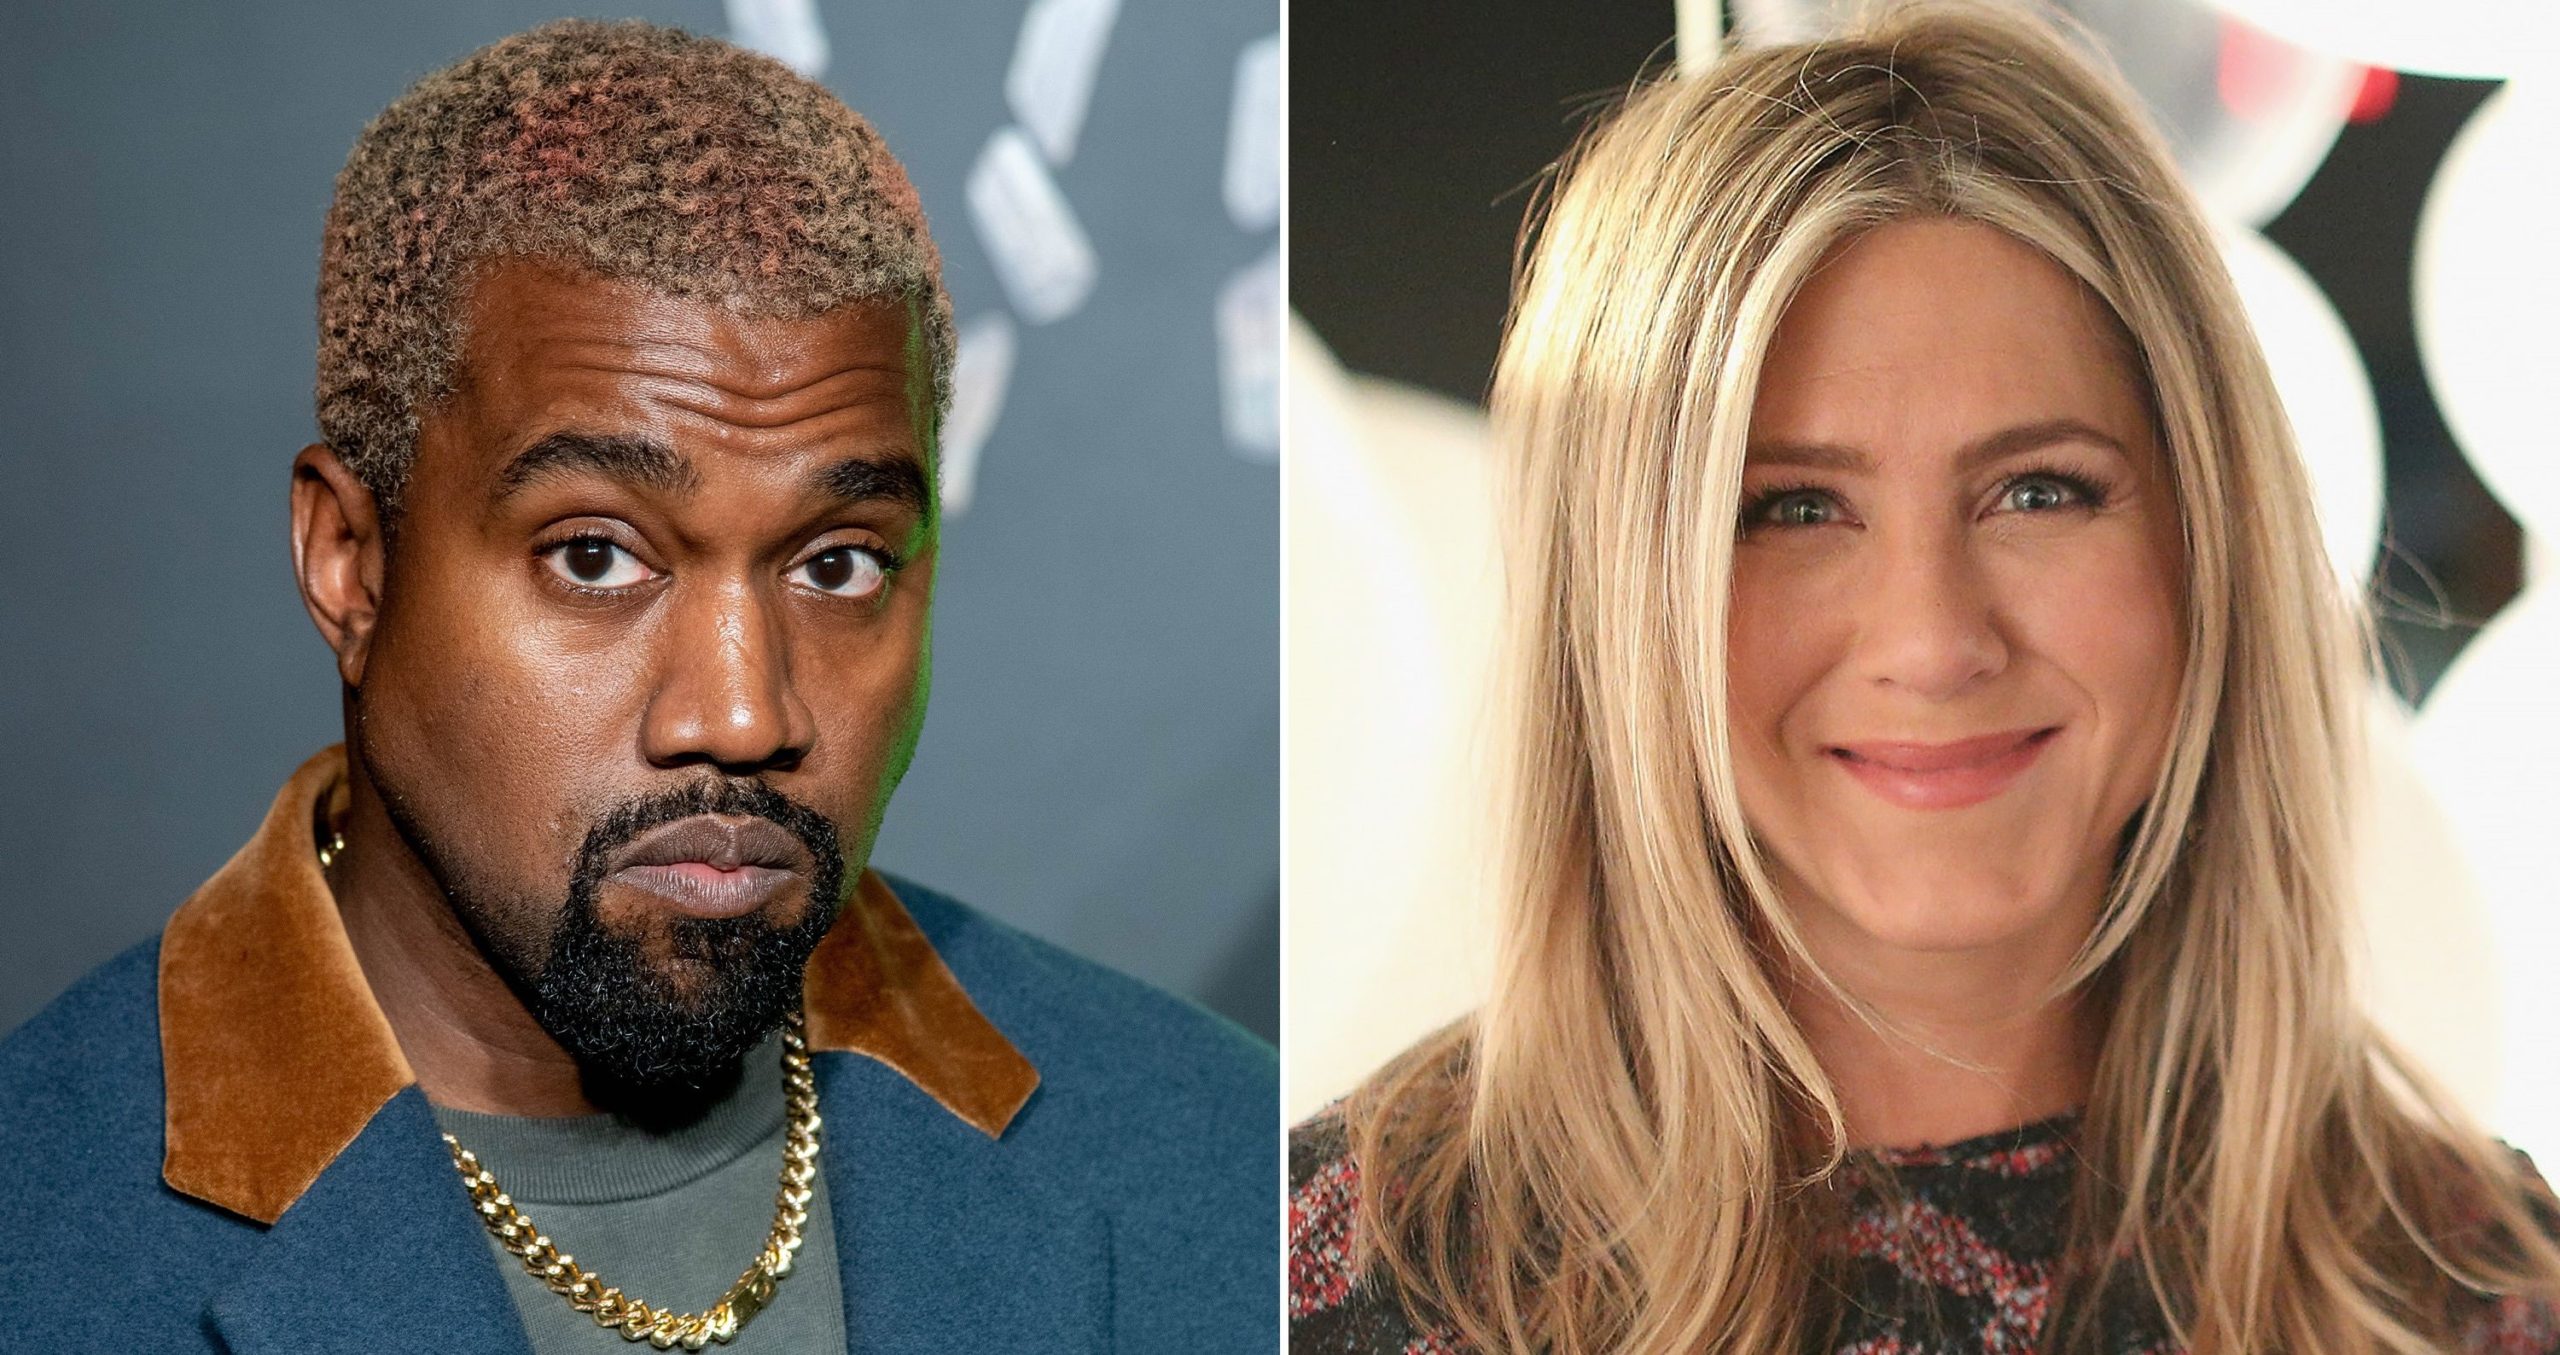 Jennifer Aniston Told People Not To Vote For Kanye, Here’s How He Responded…